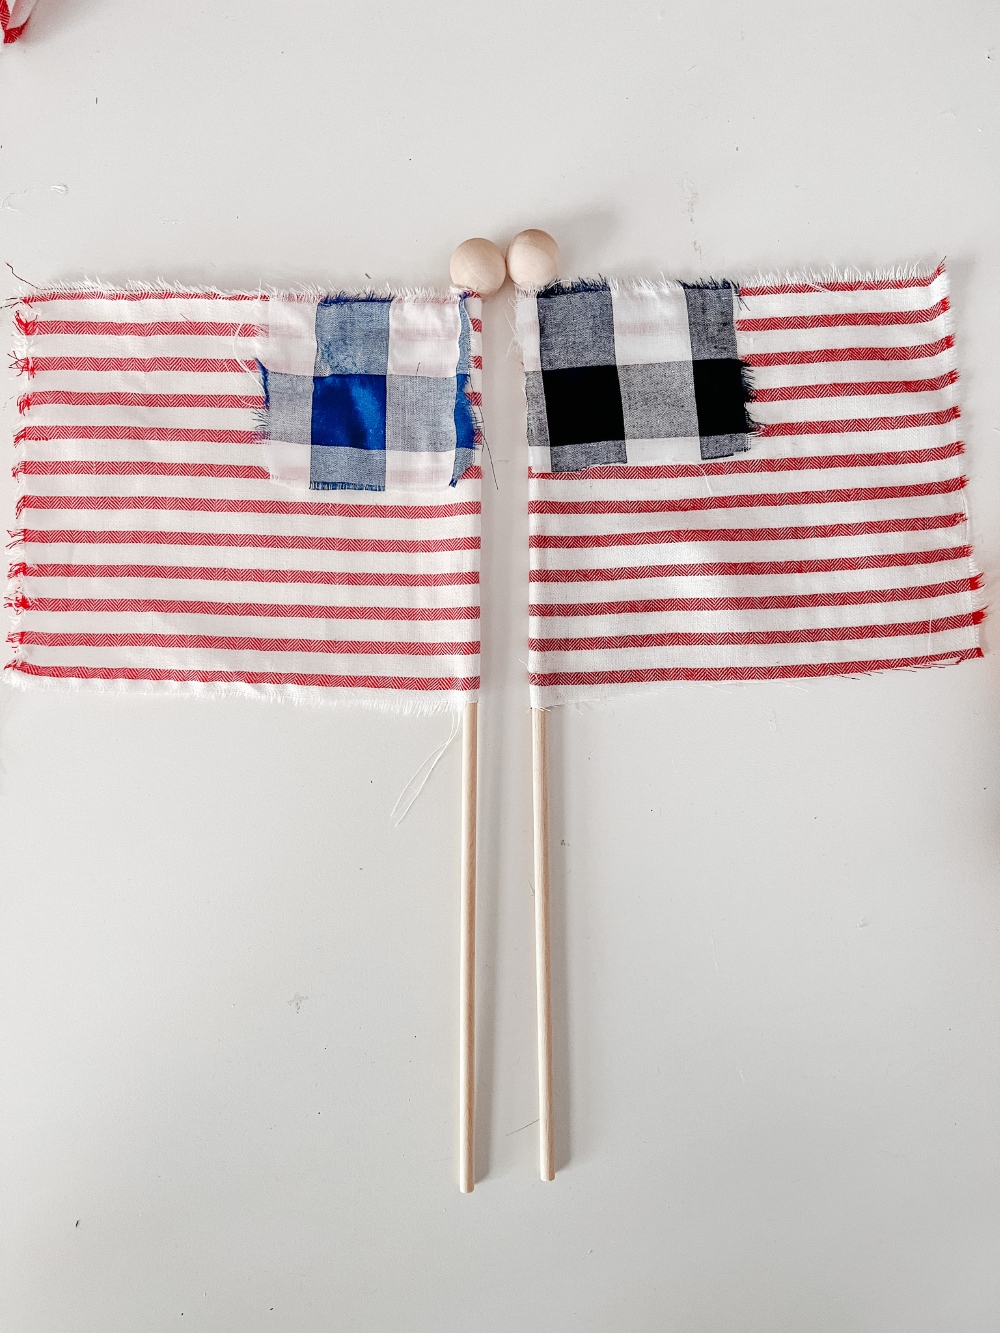 No-Sew Patriotic Scrap Flags. Mix and match left-over fabric to create pretty patriotic flags that can be used to decorate this summer!